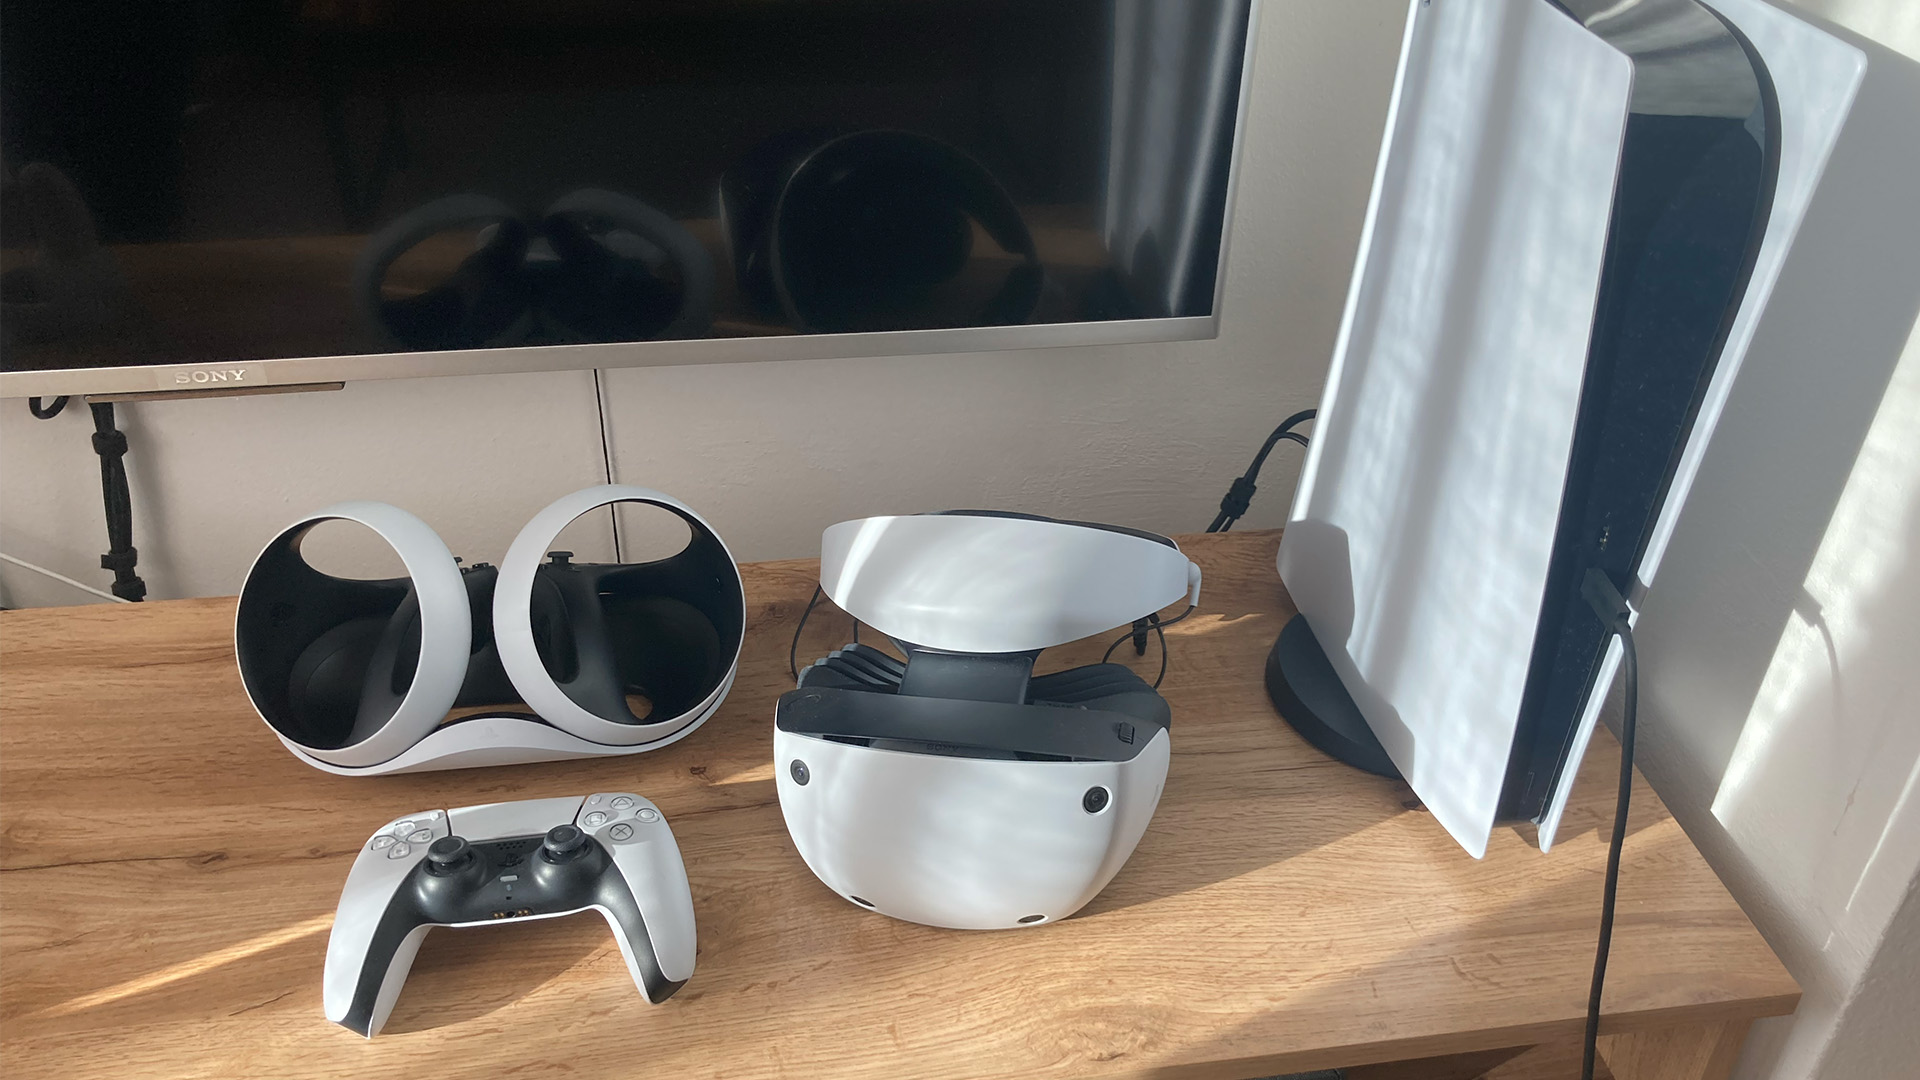 First Ever Physical PSVR2 Game, There's More Physical PSVR2 Games Coming! :  r/PSVR